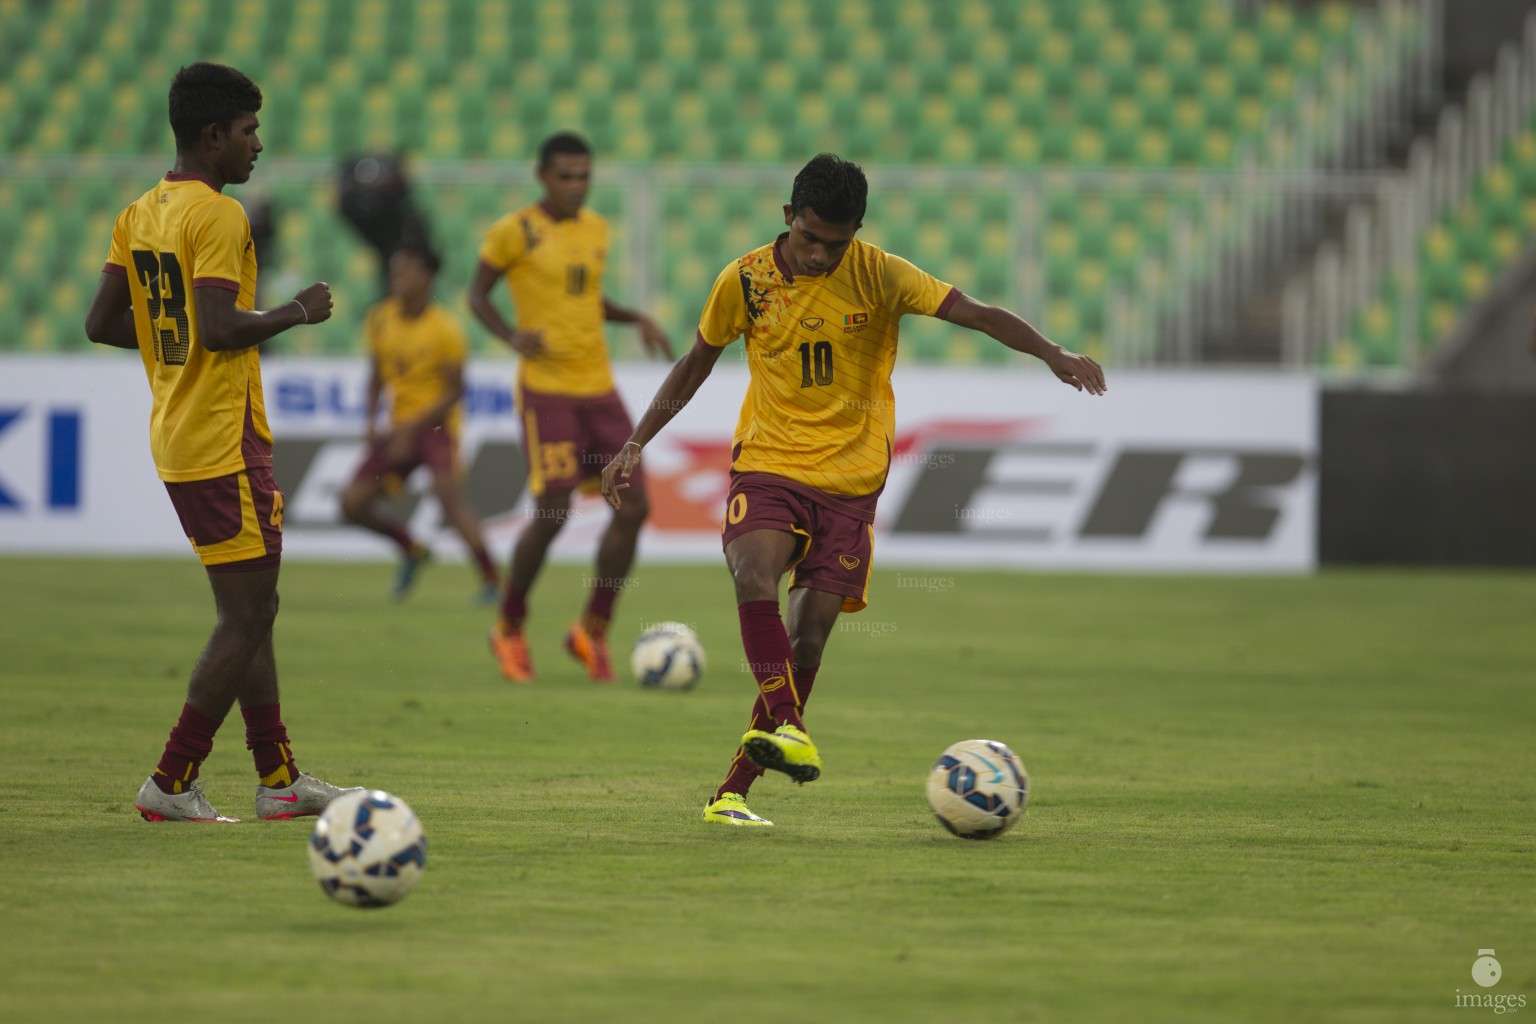 Players of Sri Lanka and Nepal warms up ahead of the SAFF Suzuki Cup opening match in Thiruvananthapuram, India, Wednesday, December 23, 2015. (Images.mv Photo: Mohamed Ahsan)